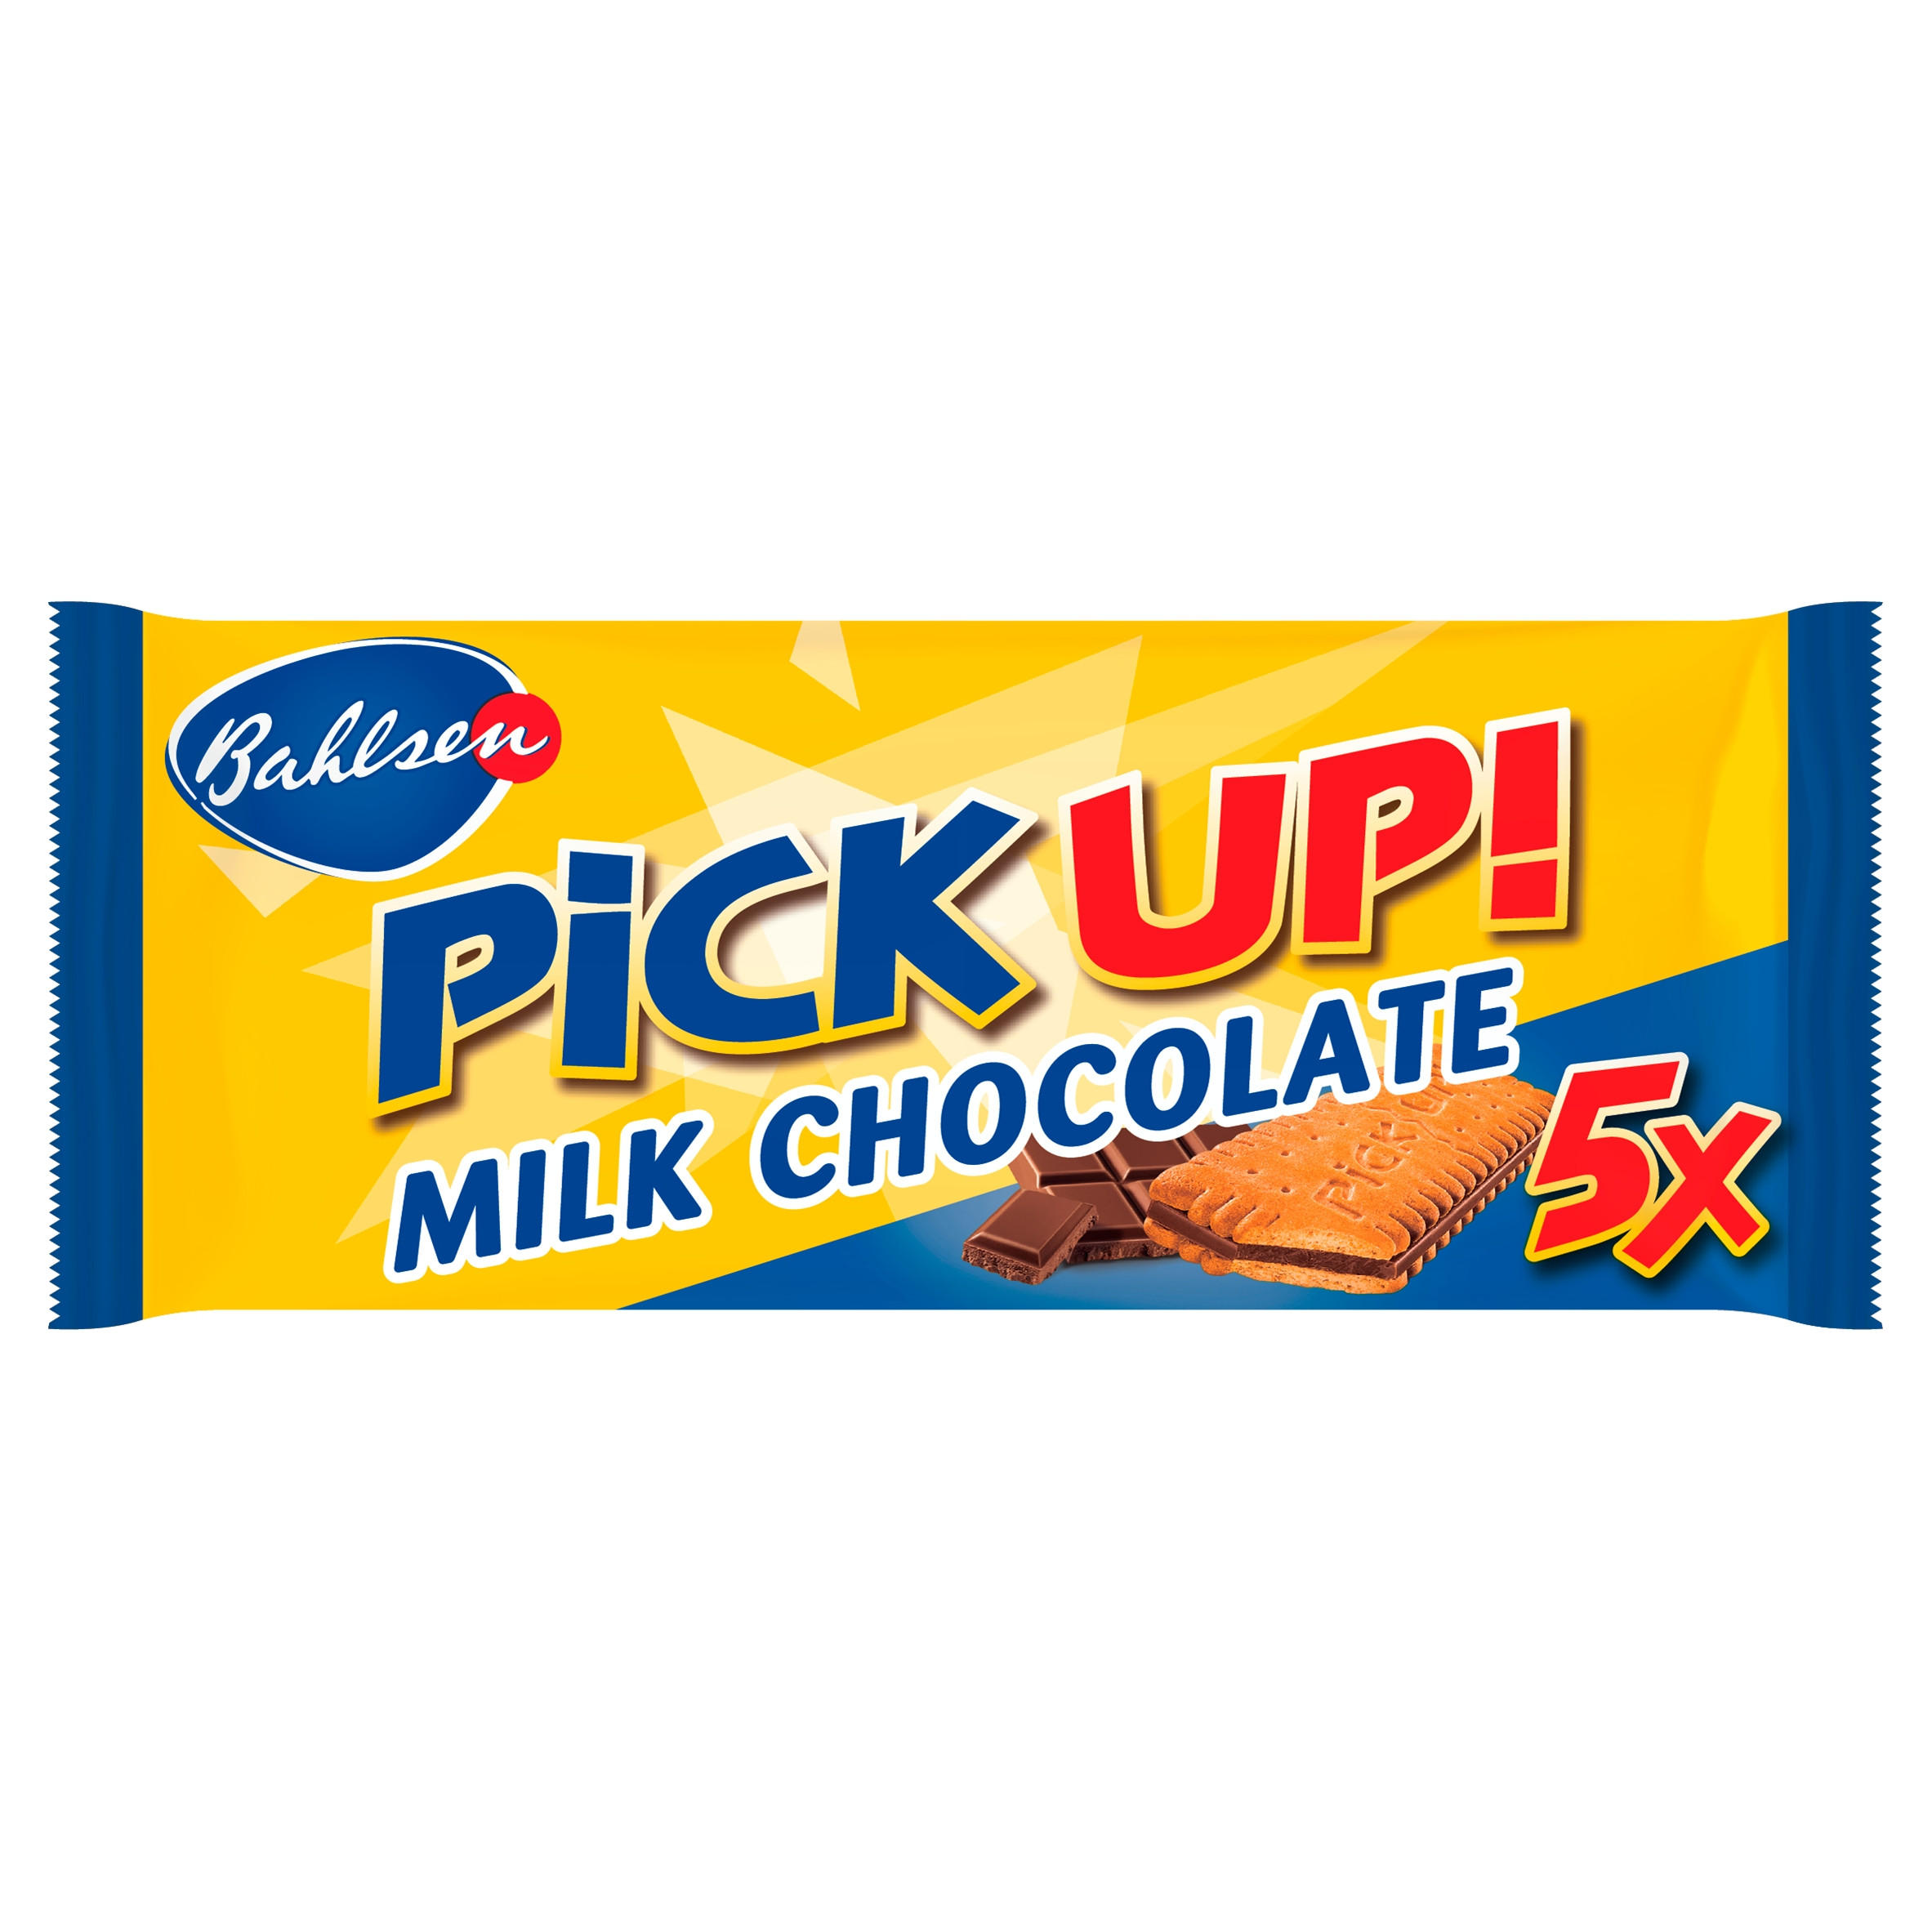 Bahlsen Pick Up! Milk Chocolate 5 x 28g (140g), Multipack Biscuits